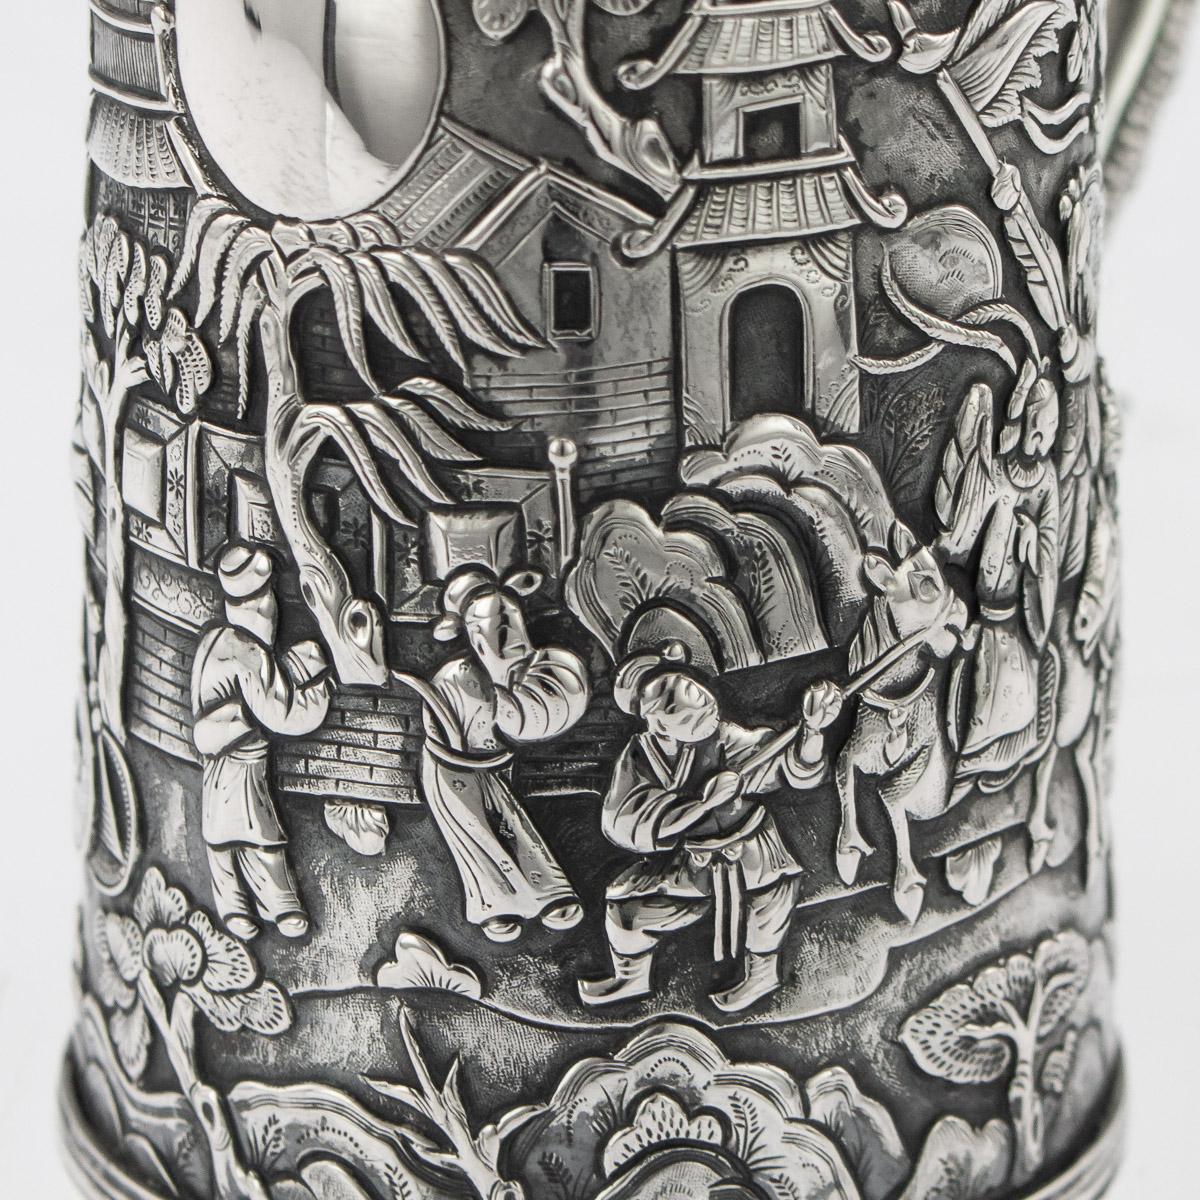 19thC Chinese Export Solid Silver Nobility Scenes Mug, Cutshing, c.1870 3